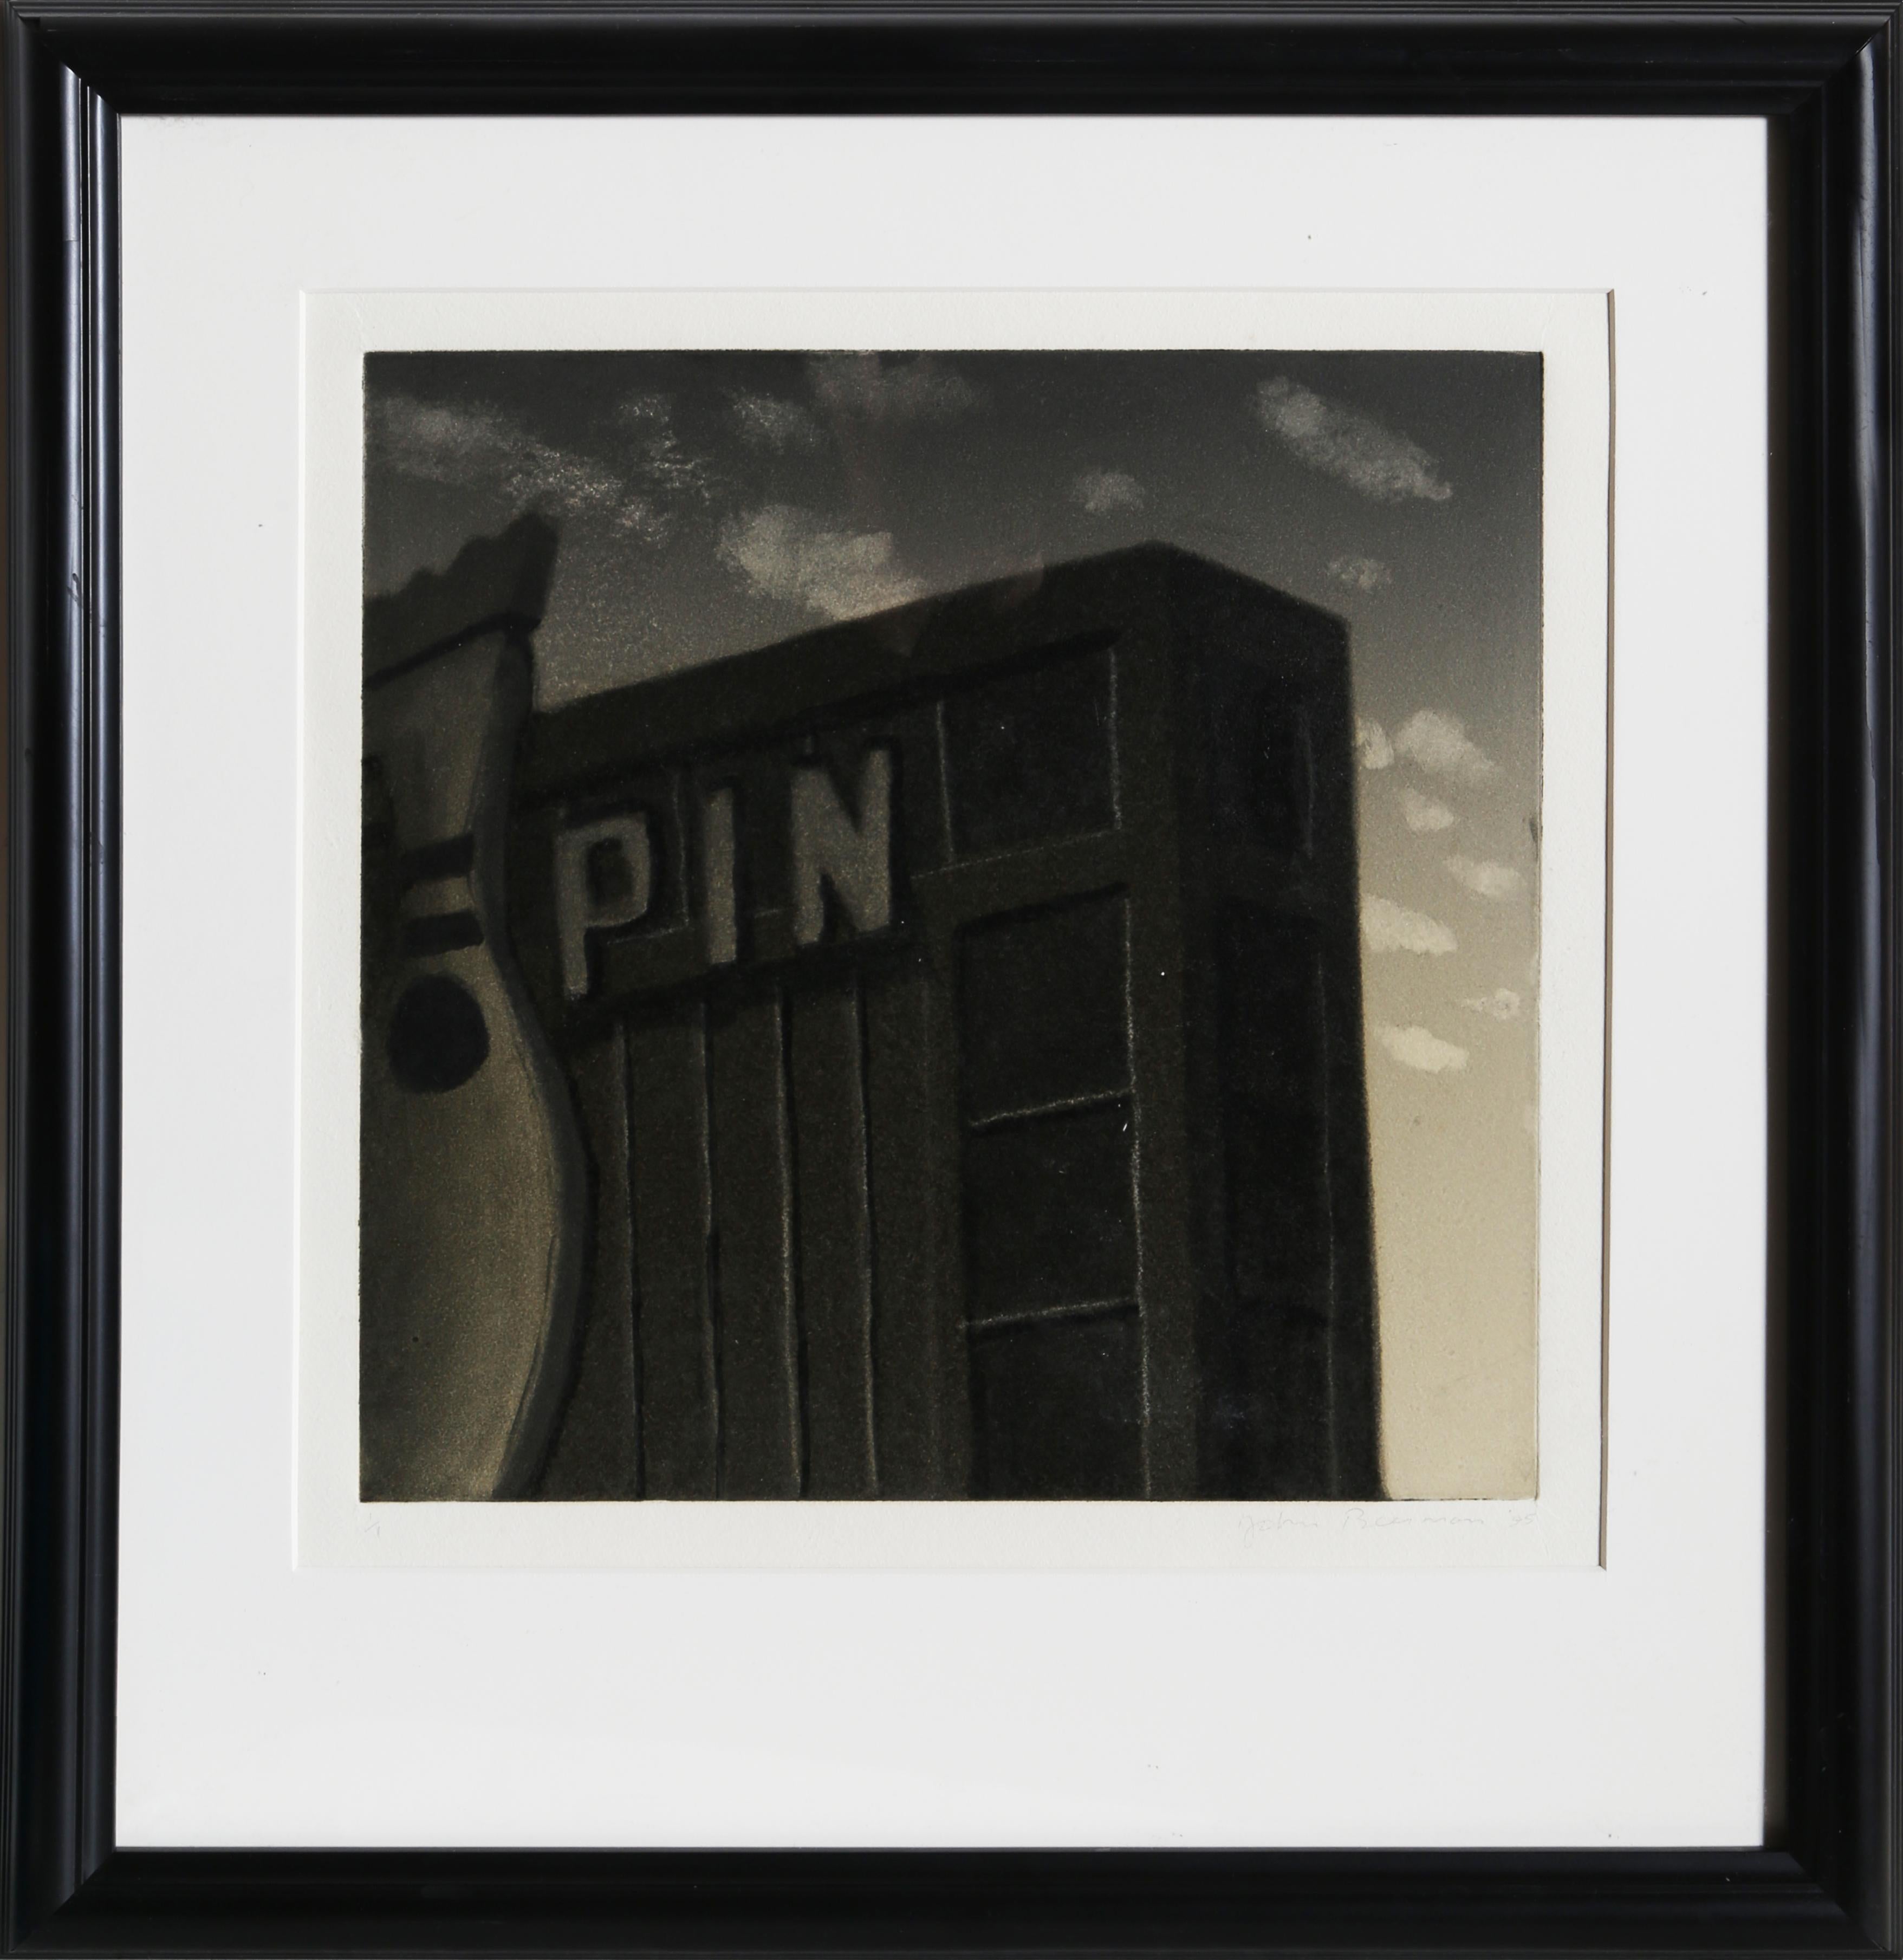 The upper corner of a bowling alley silhouetted against the sky in the fading evening light. Only the word "Pin" and a crowned bowling pin can be seen of the sign on the facade. This monotype is signed and numbered in pencil by the artist and is